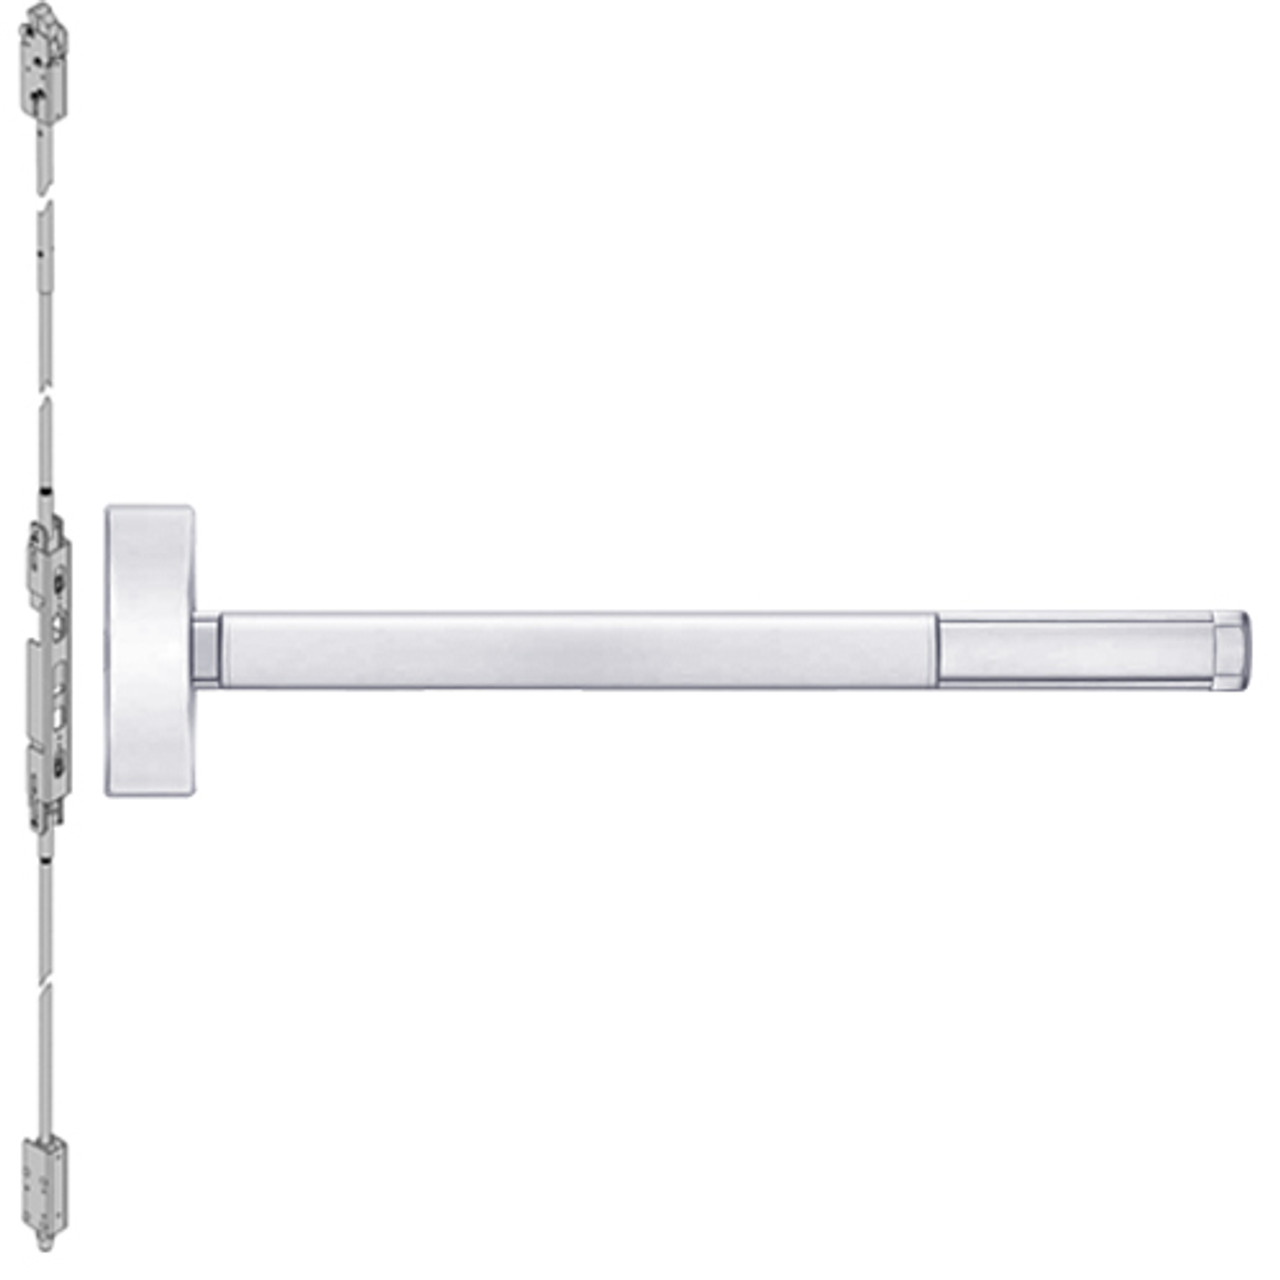 FL2805LBR-625-48 PHI 2800 Series Fire Rated Concealed Vertical Rod Exit Device Prepped for Key Controls Thumb Piece in Bright Chrome Finish